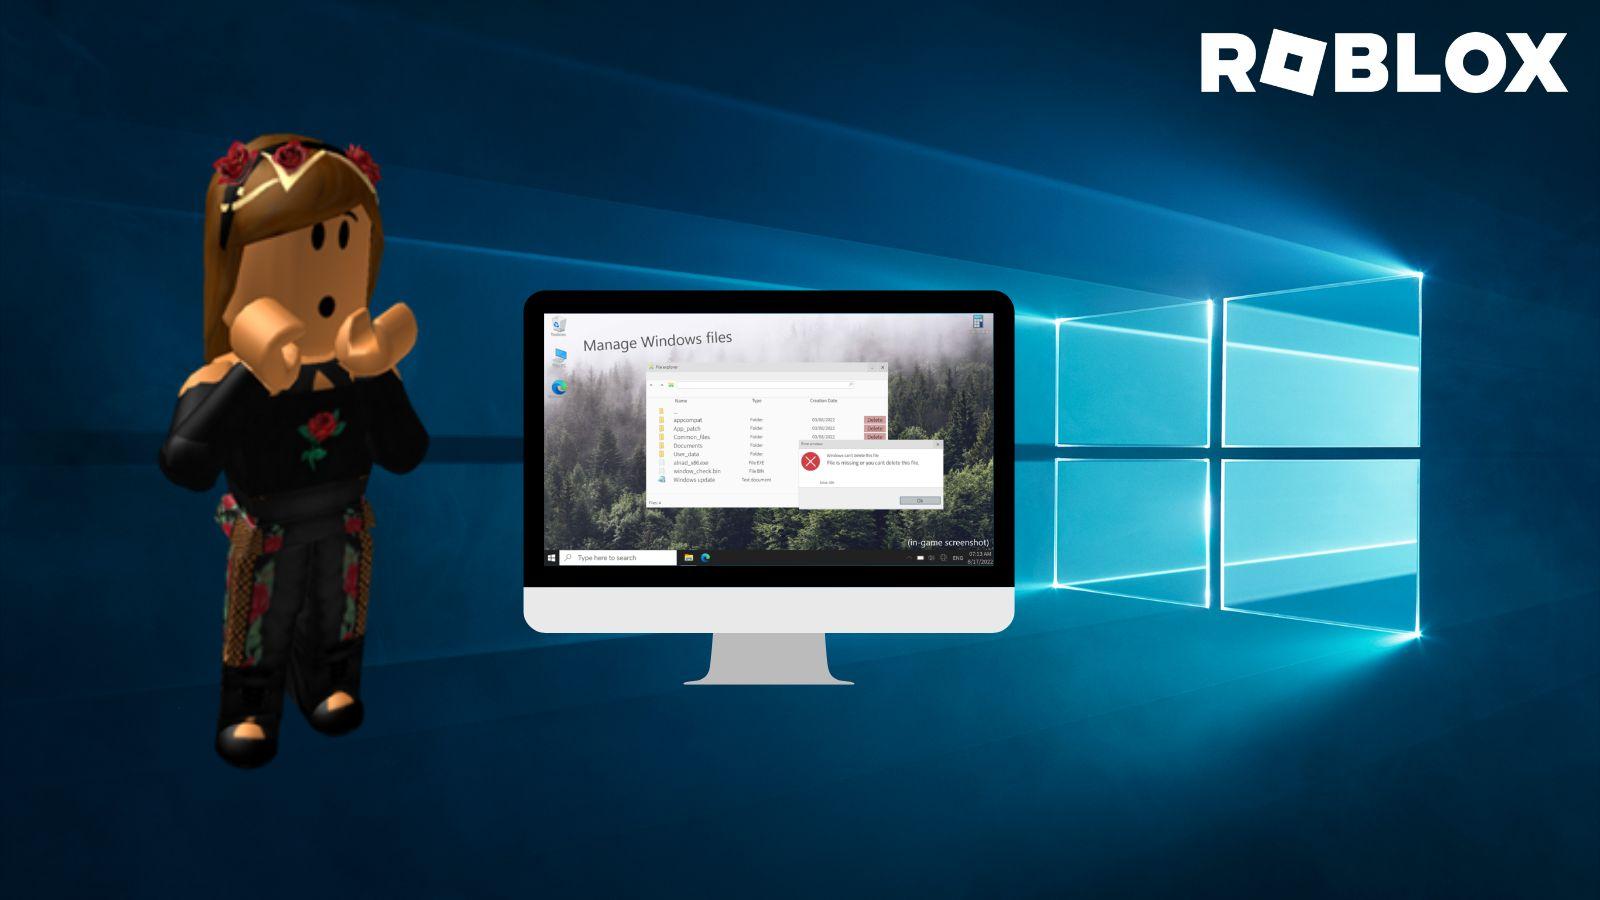 Windows 10 Gems: Build your own world with Roblox